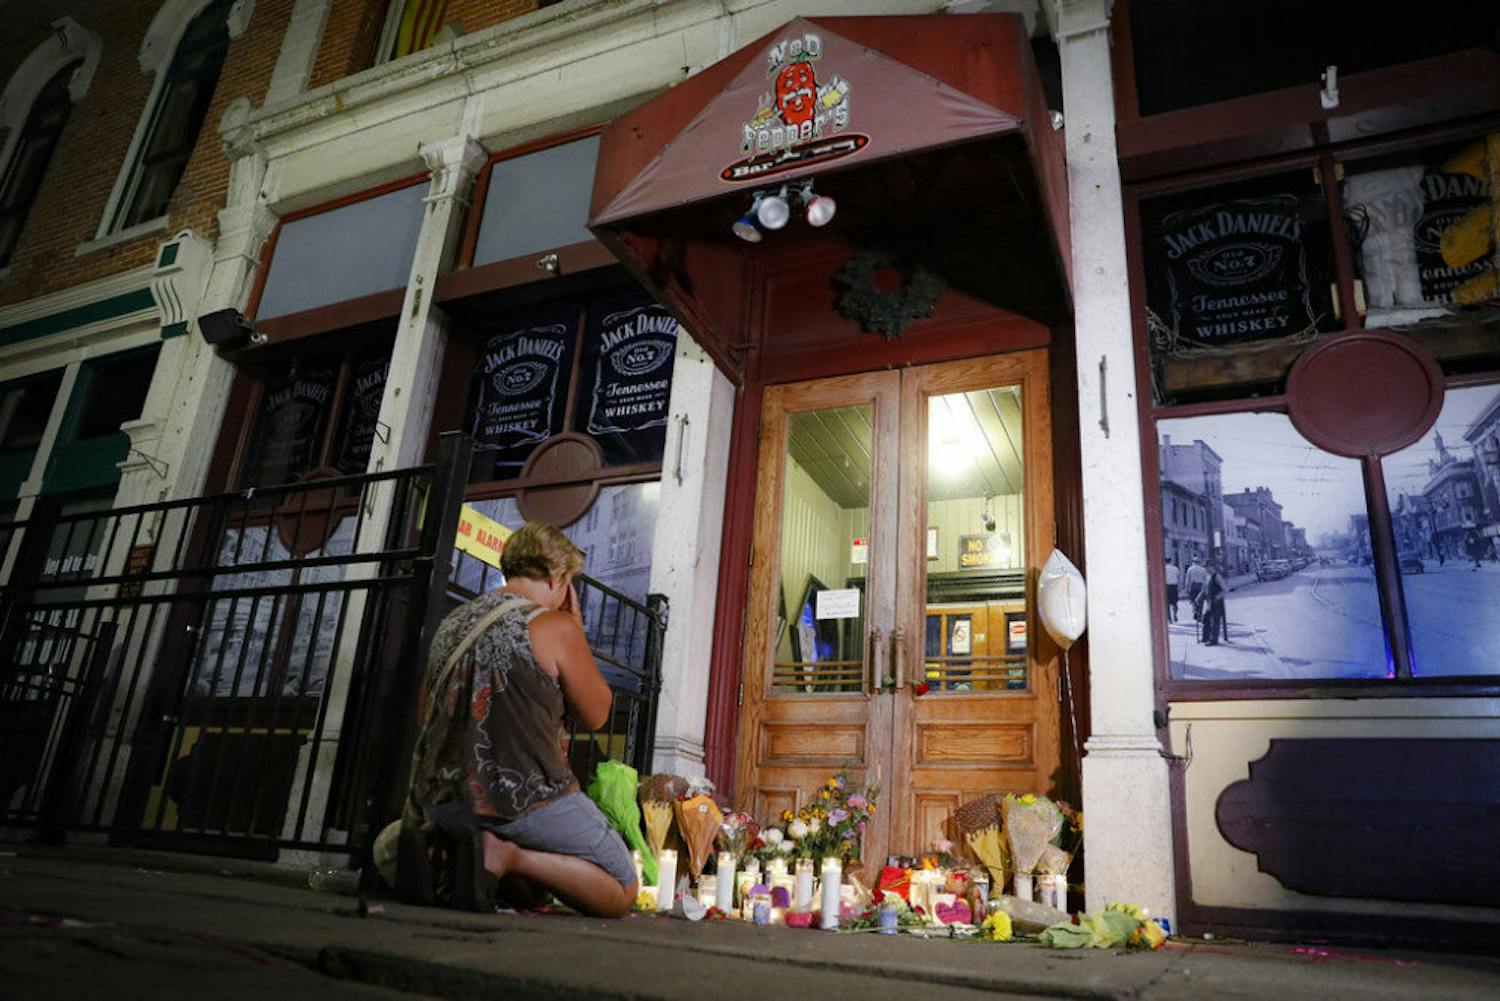 Mourners visit a makeshift memorial outside Ned Peppers bar following a vigil at the scene of a mass shooting, Sunday, Aug. 4, 2019, in Dayton, Ohio. A masked gunman in body armor opened fire early Sunday in the popular entertainment district in Dayton, killing several people, including his sister, and wounding dozens before he was quickly slain by police, officials said.&nbsp;